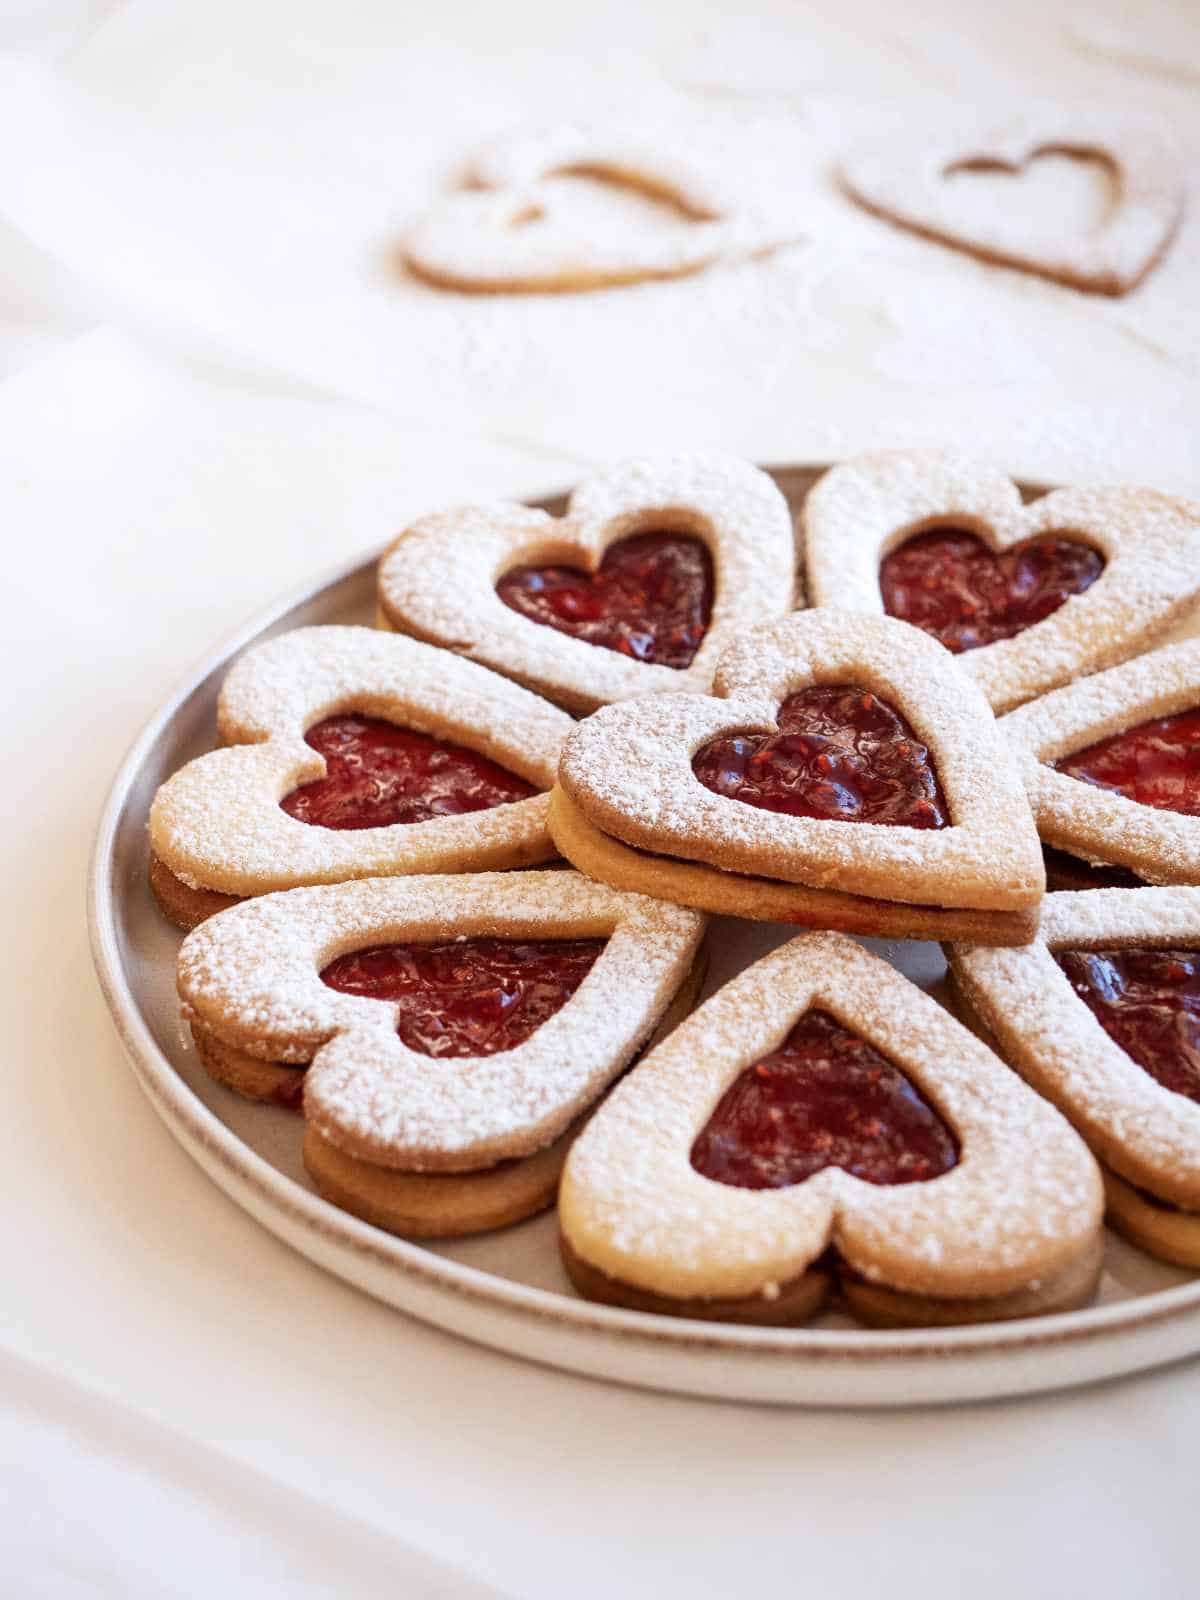 Plate of Raspberry Linzer cookies with sugar dusted cutout tops in the background.